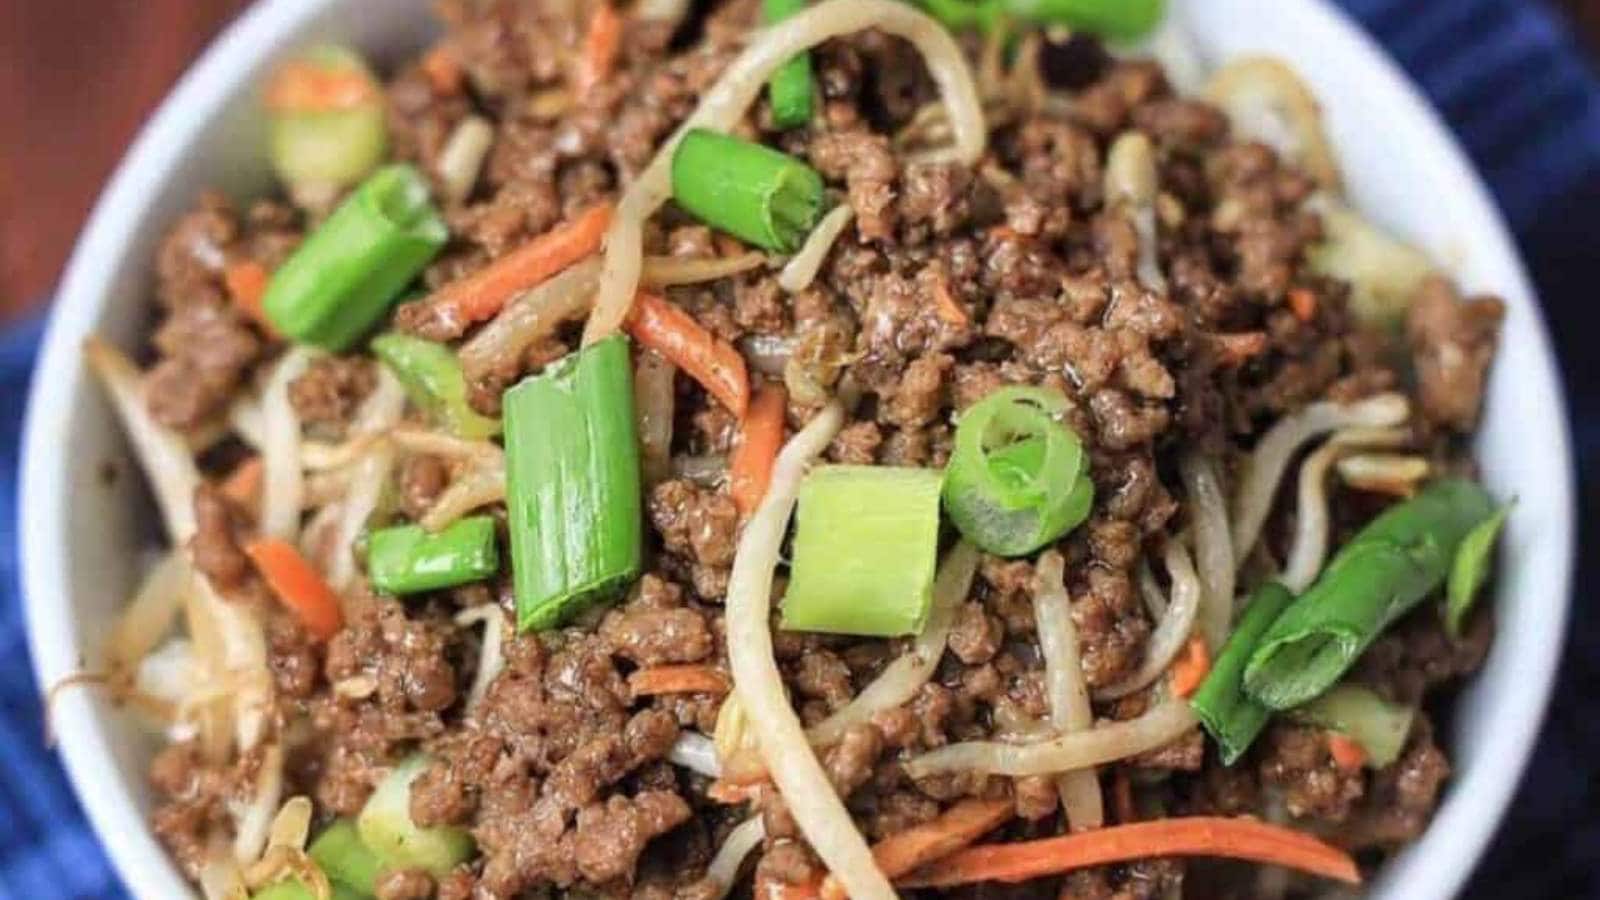 Asian Garlic Beef Skillet Meal recipe by Home School And Happiness.